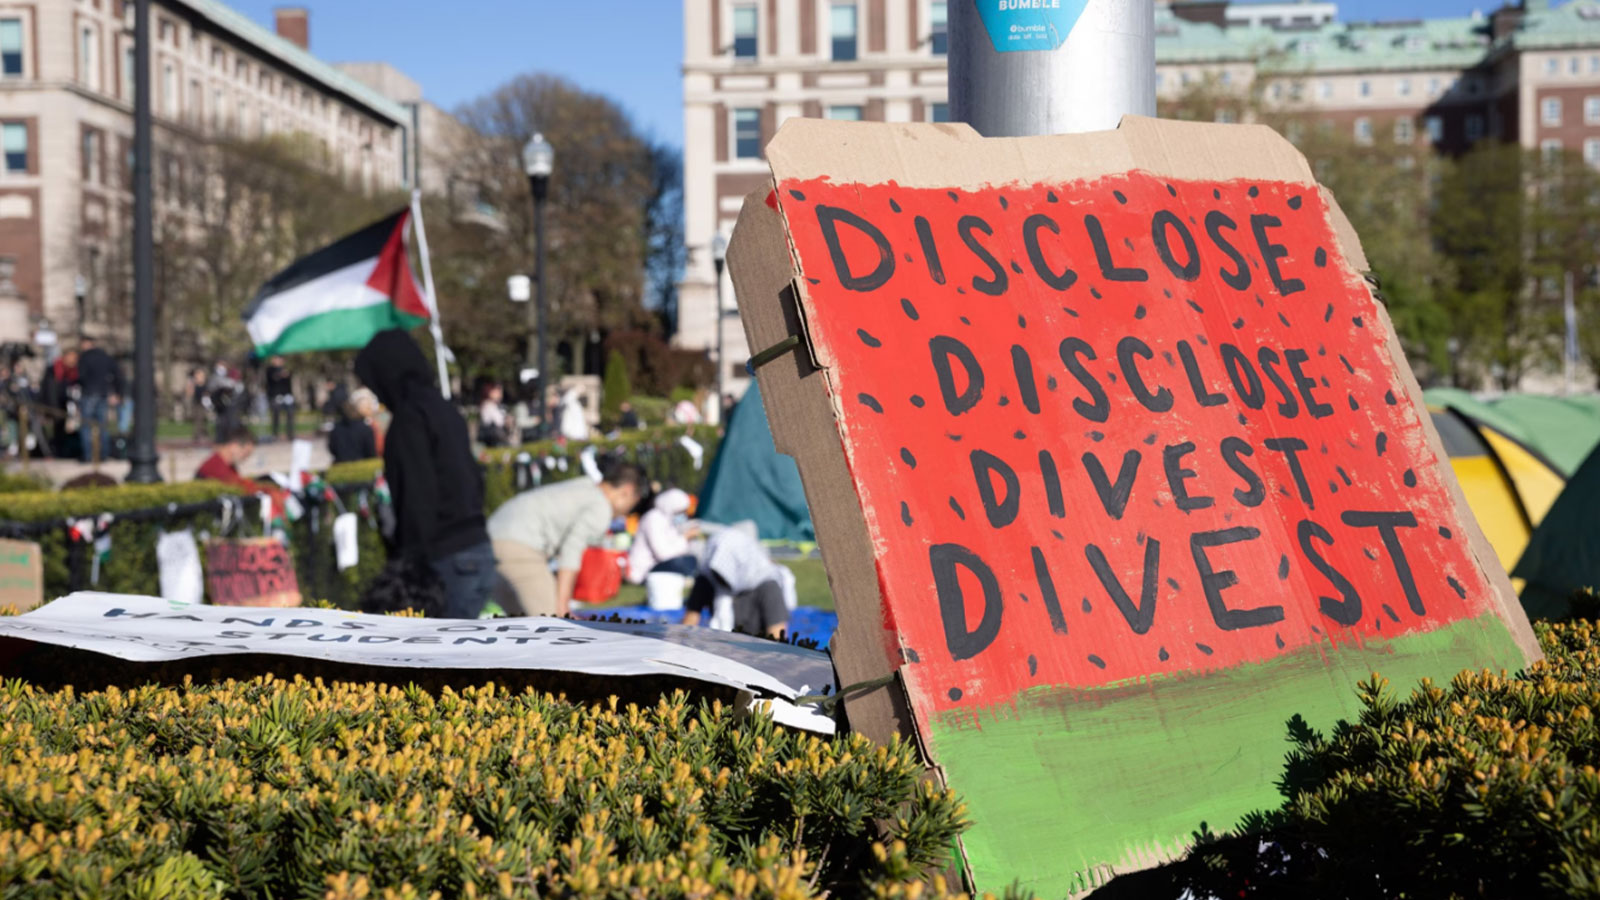 Student demands for divestment are not new